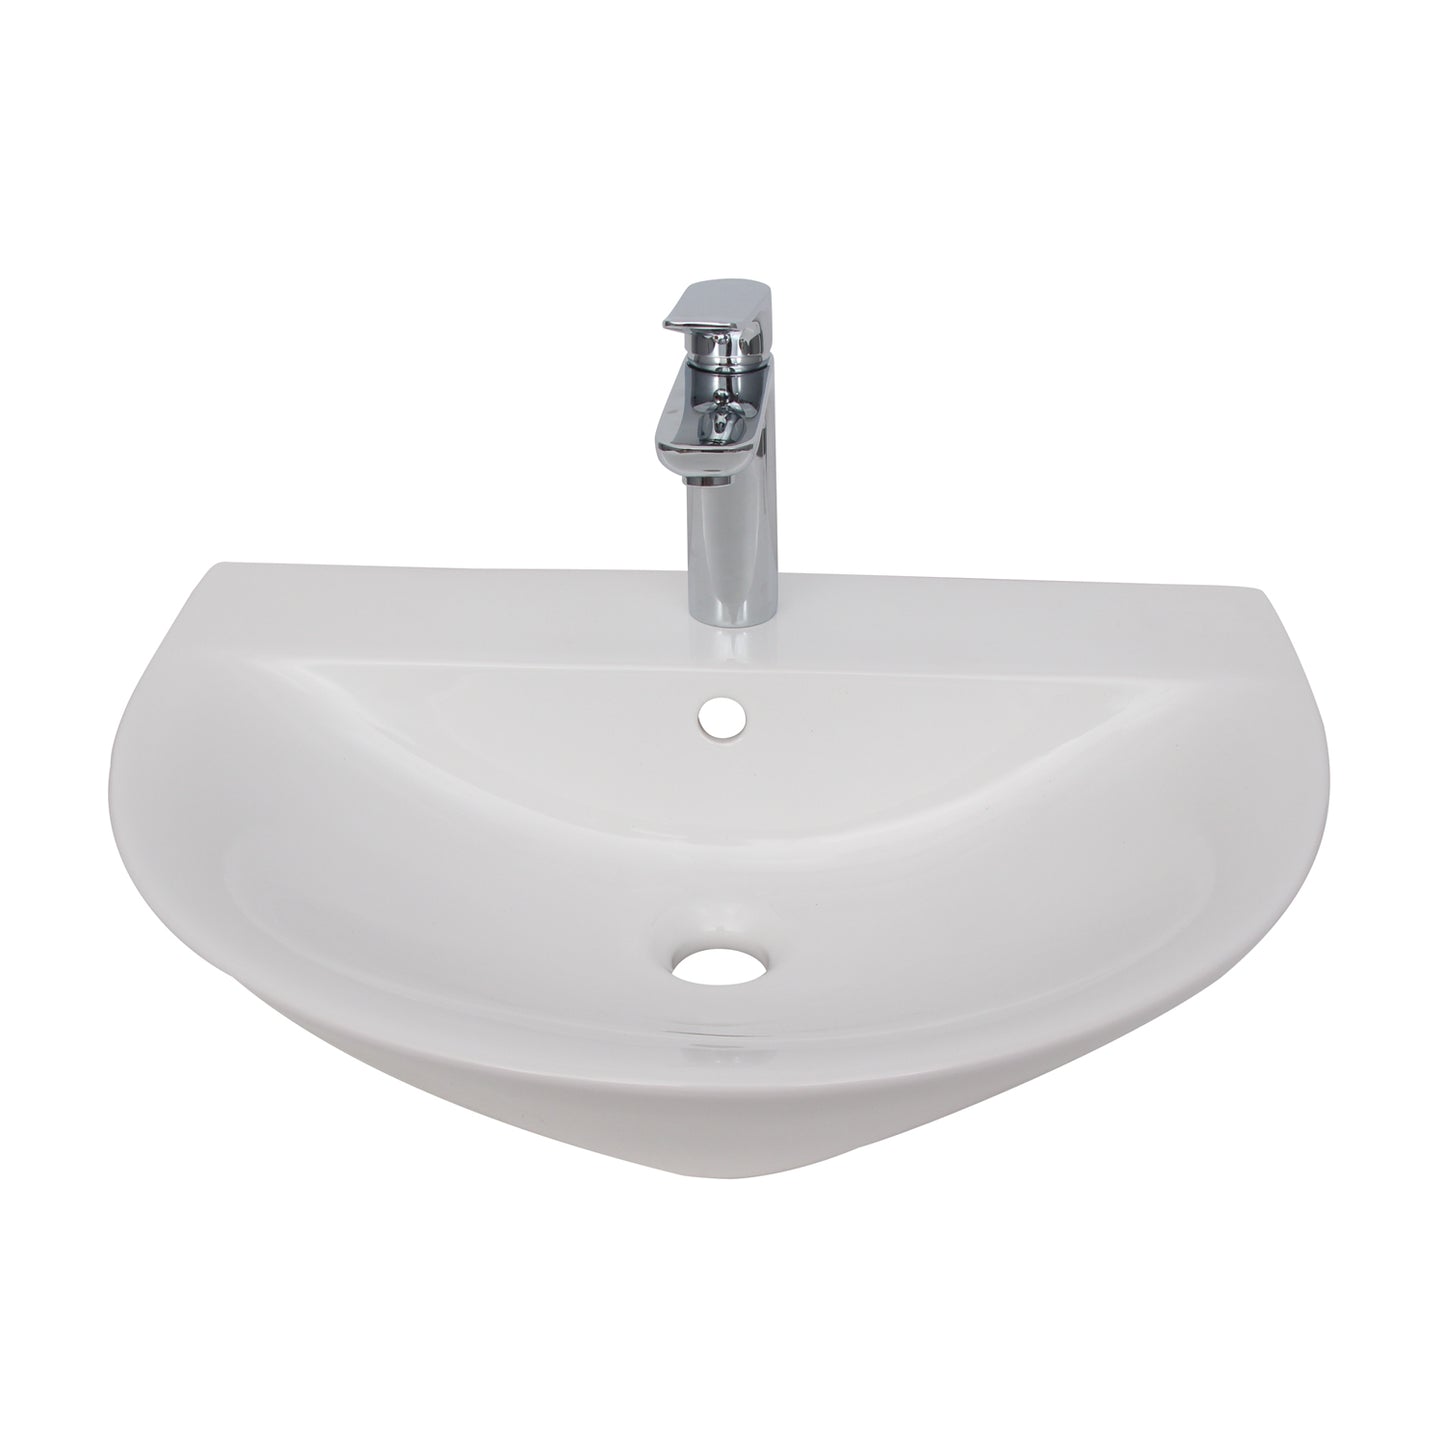 Morning 550 Wall Hung Bathroom Sink with 1 Faucet Hole White